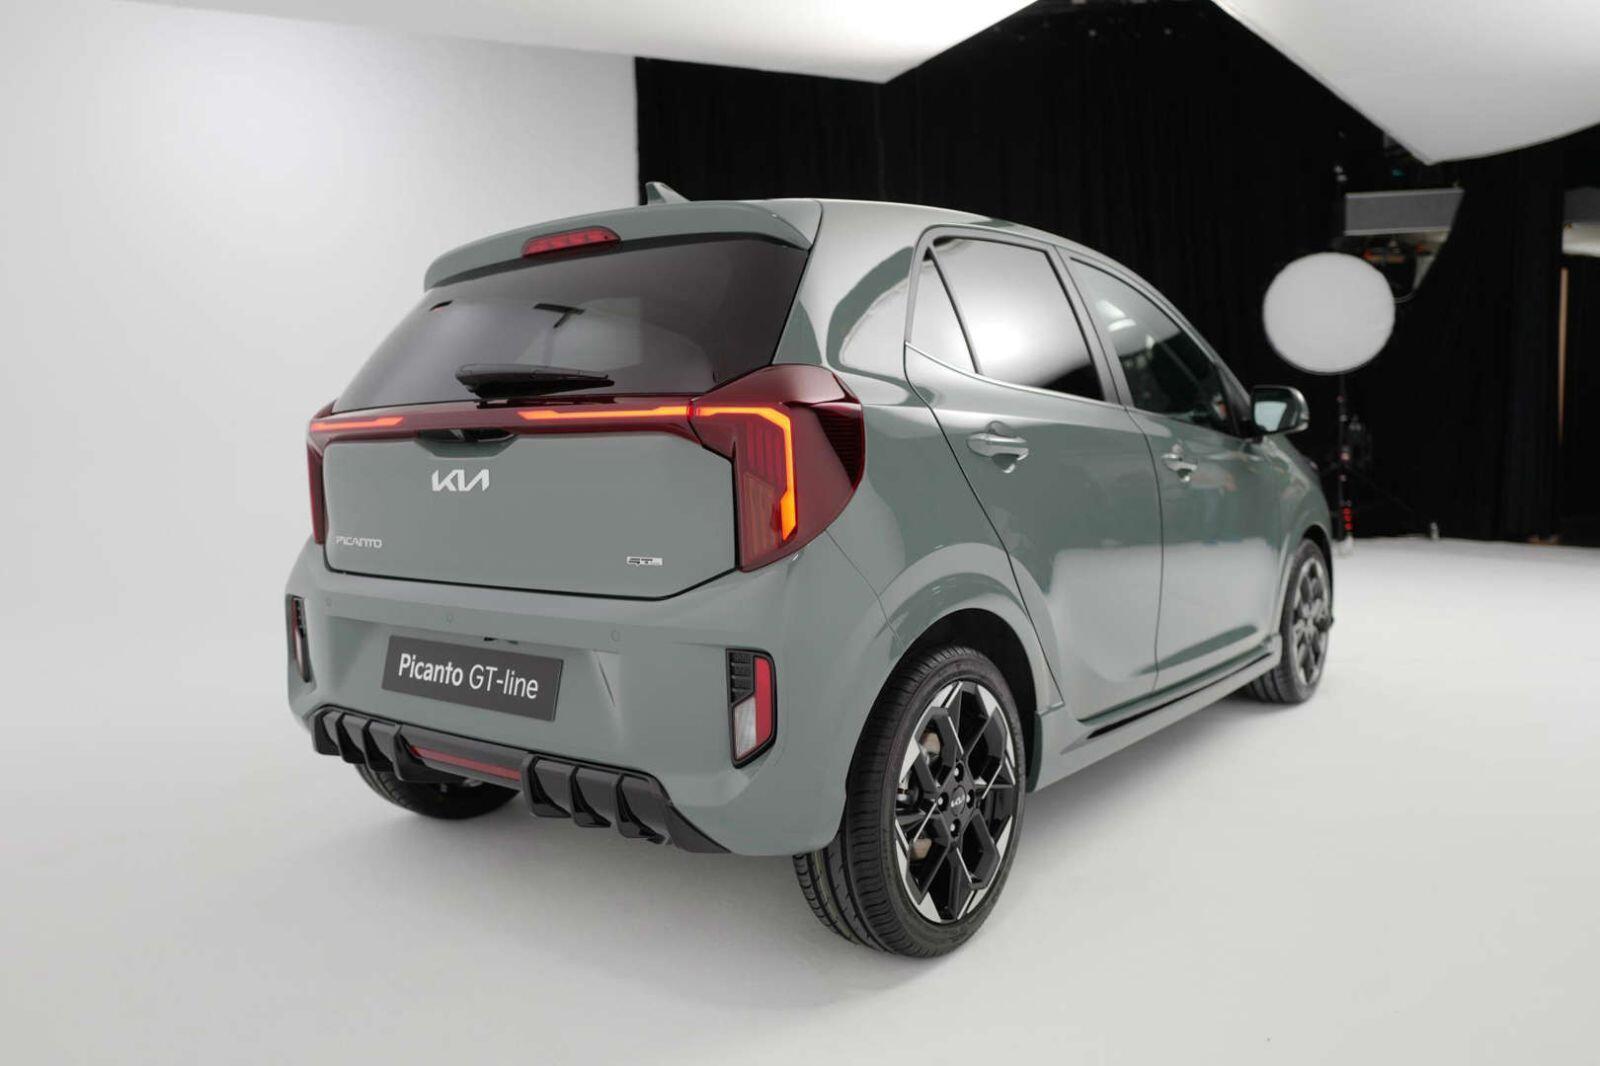 Get ready for the all-new, souped-up Kia Picanto